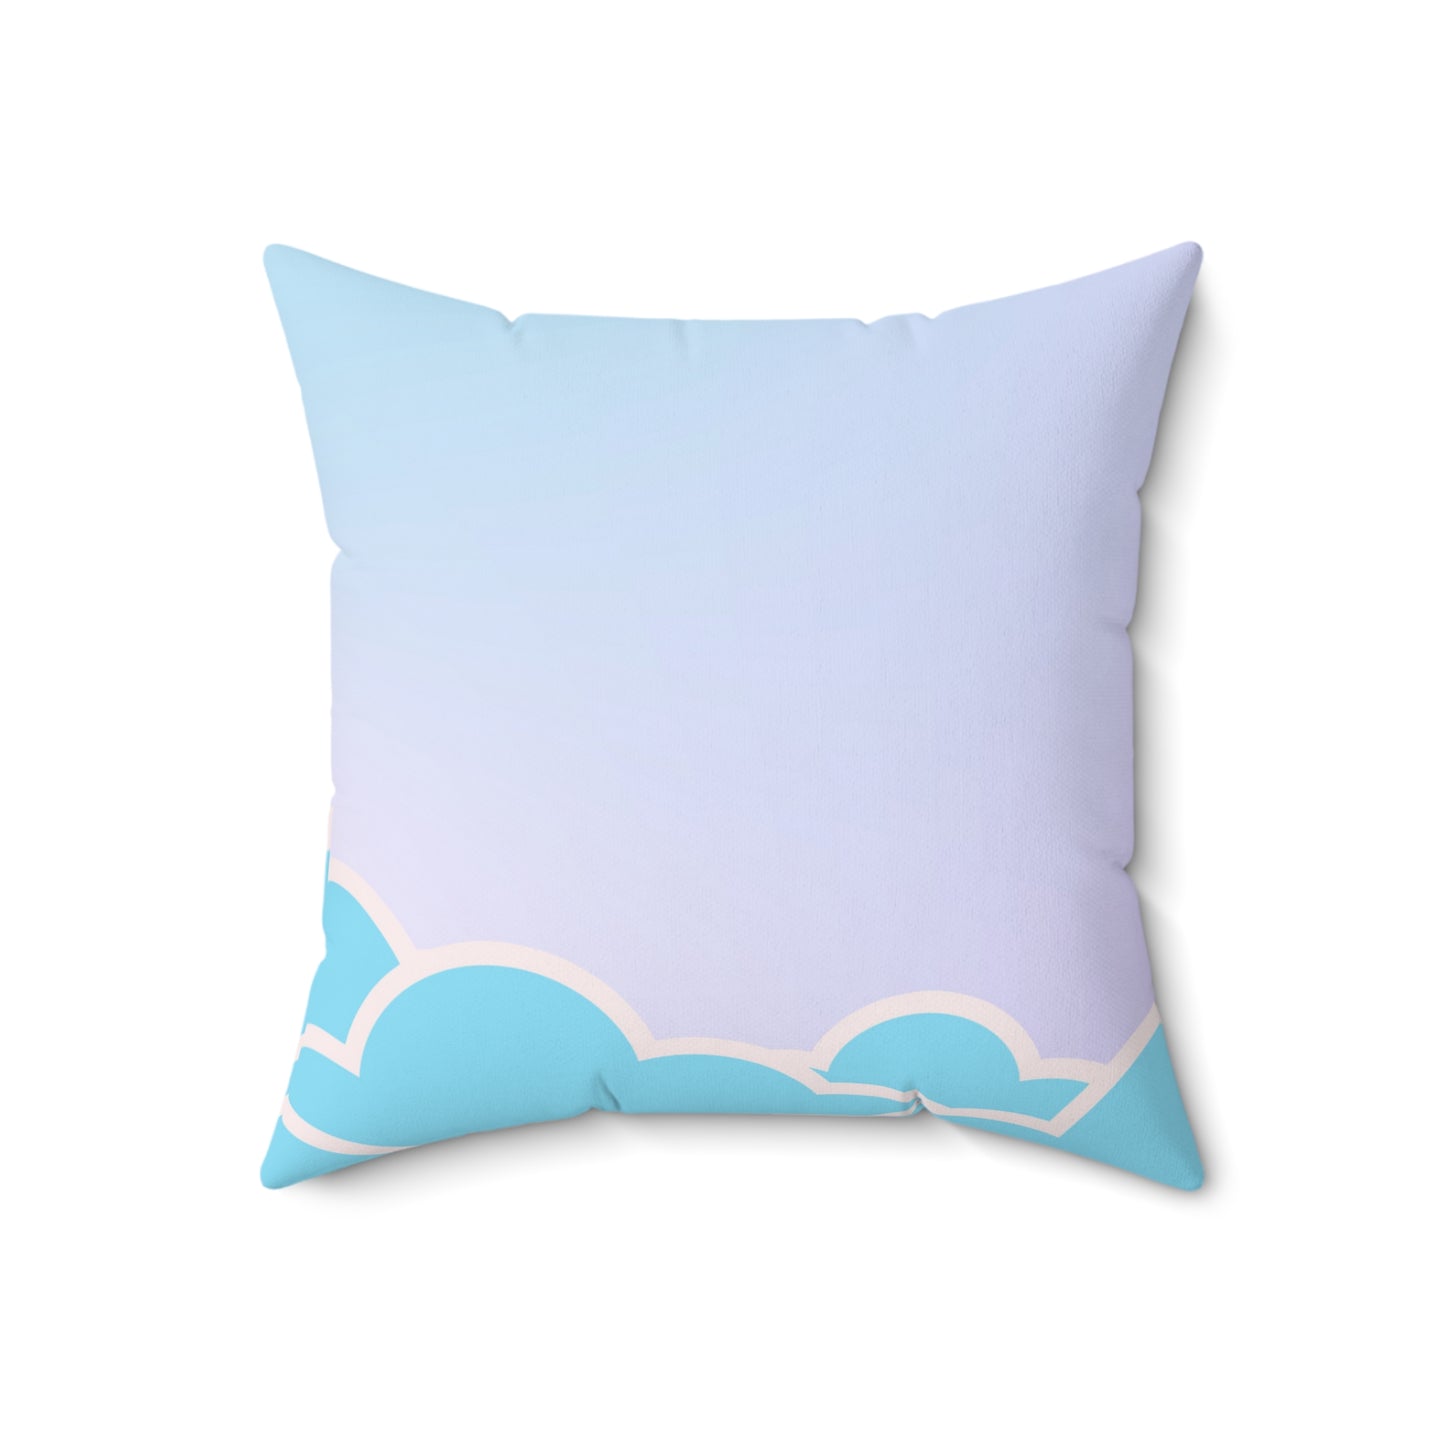 Bouncy Clouds Square Pillow